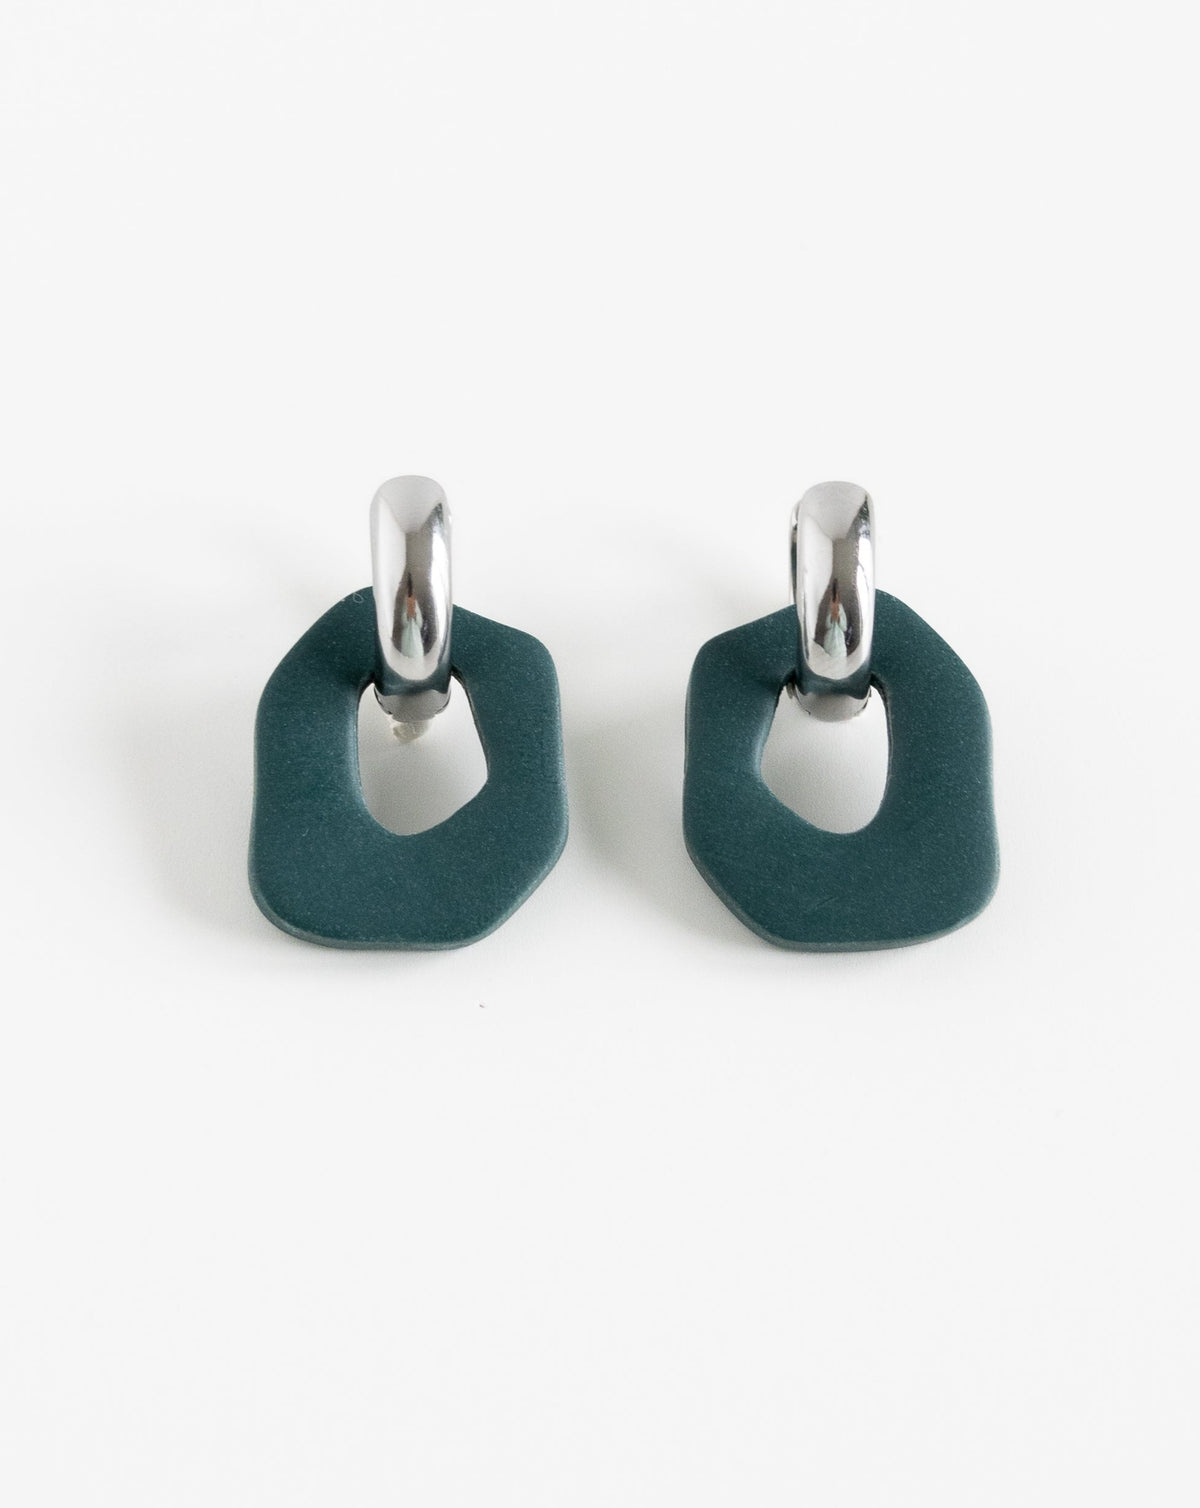 Darien earrings in Pine color with silver hoops, front view